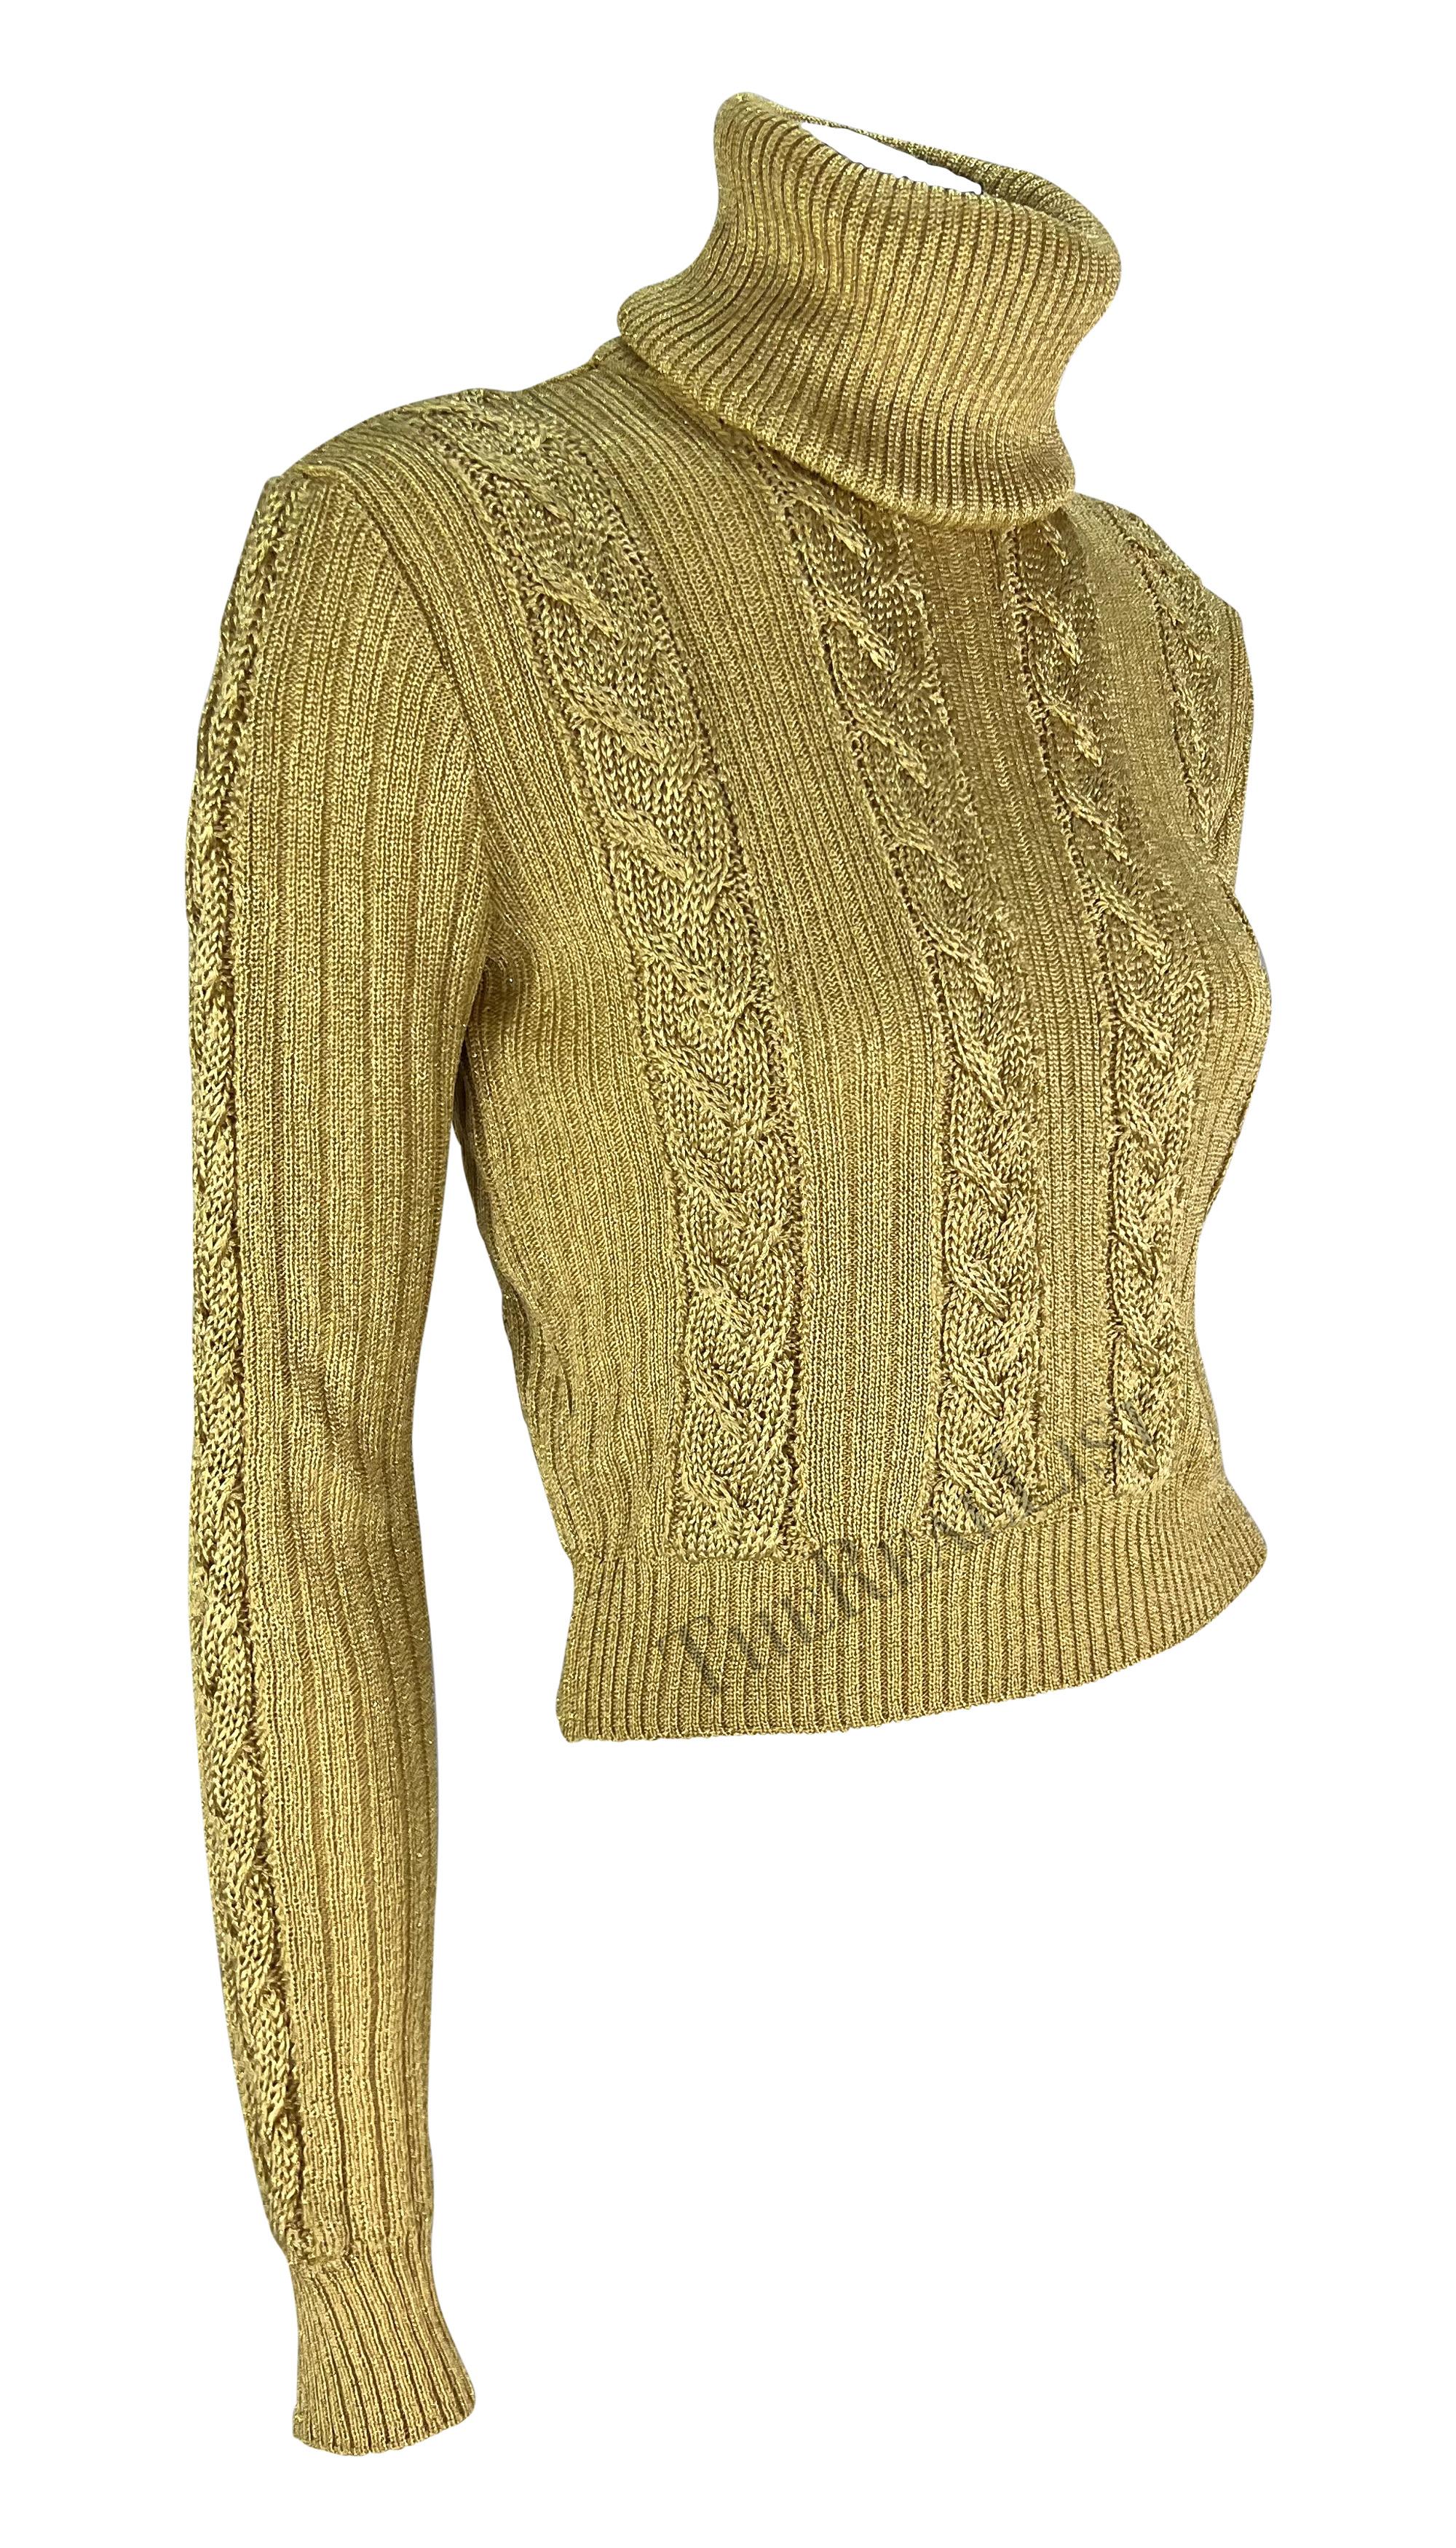 F/W 1994 Gianni Versace Ad Runway Gold Metallic Cable Knit Turtleneck Sweater For Sale 5